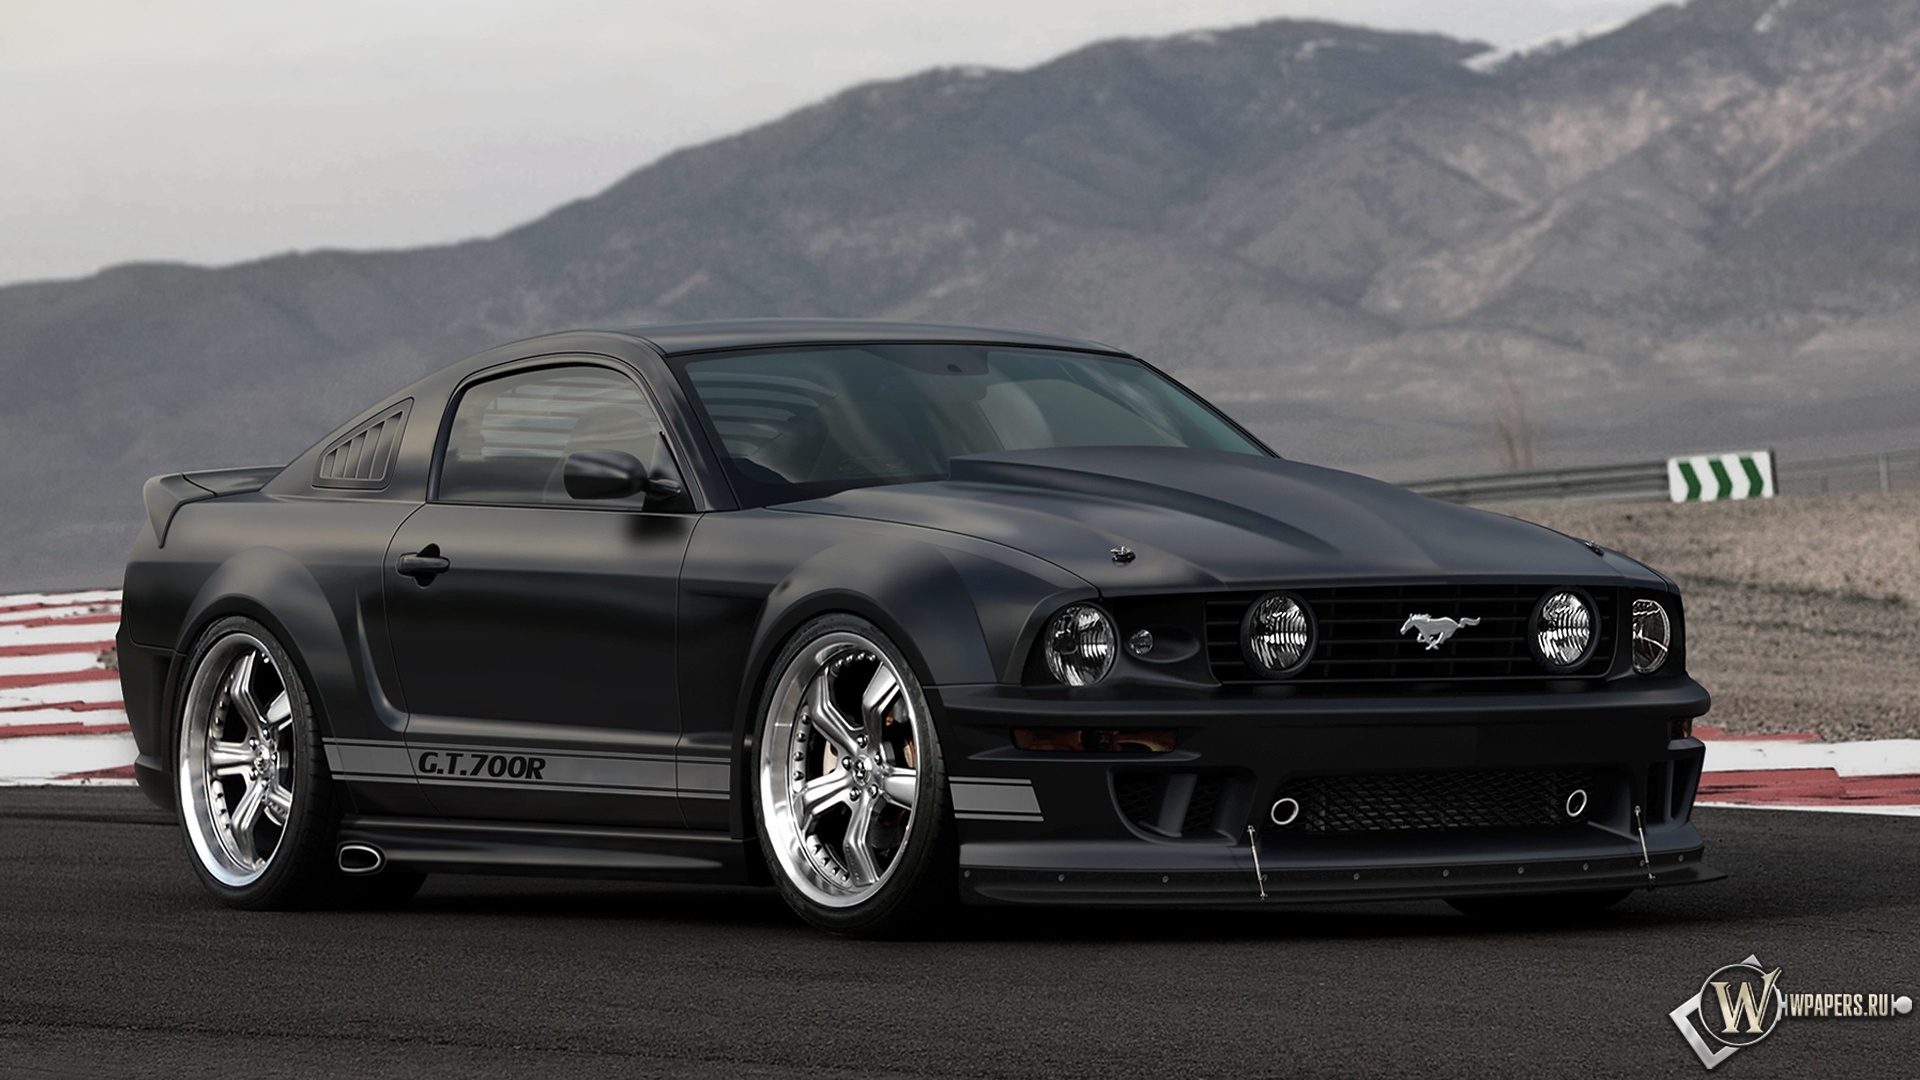 FORD MUSTANG GT 700 1920x1080